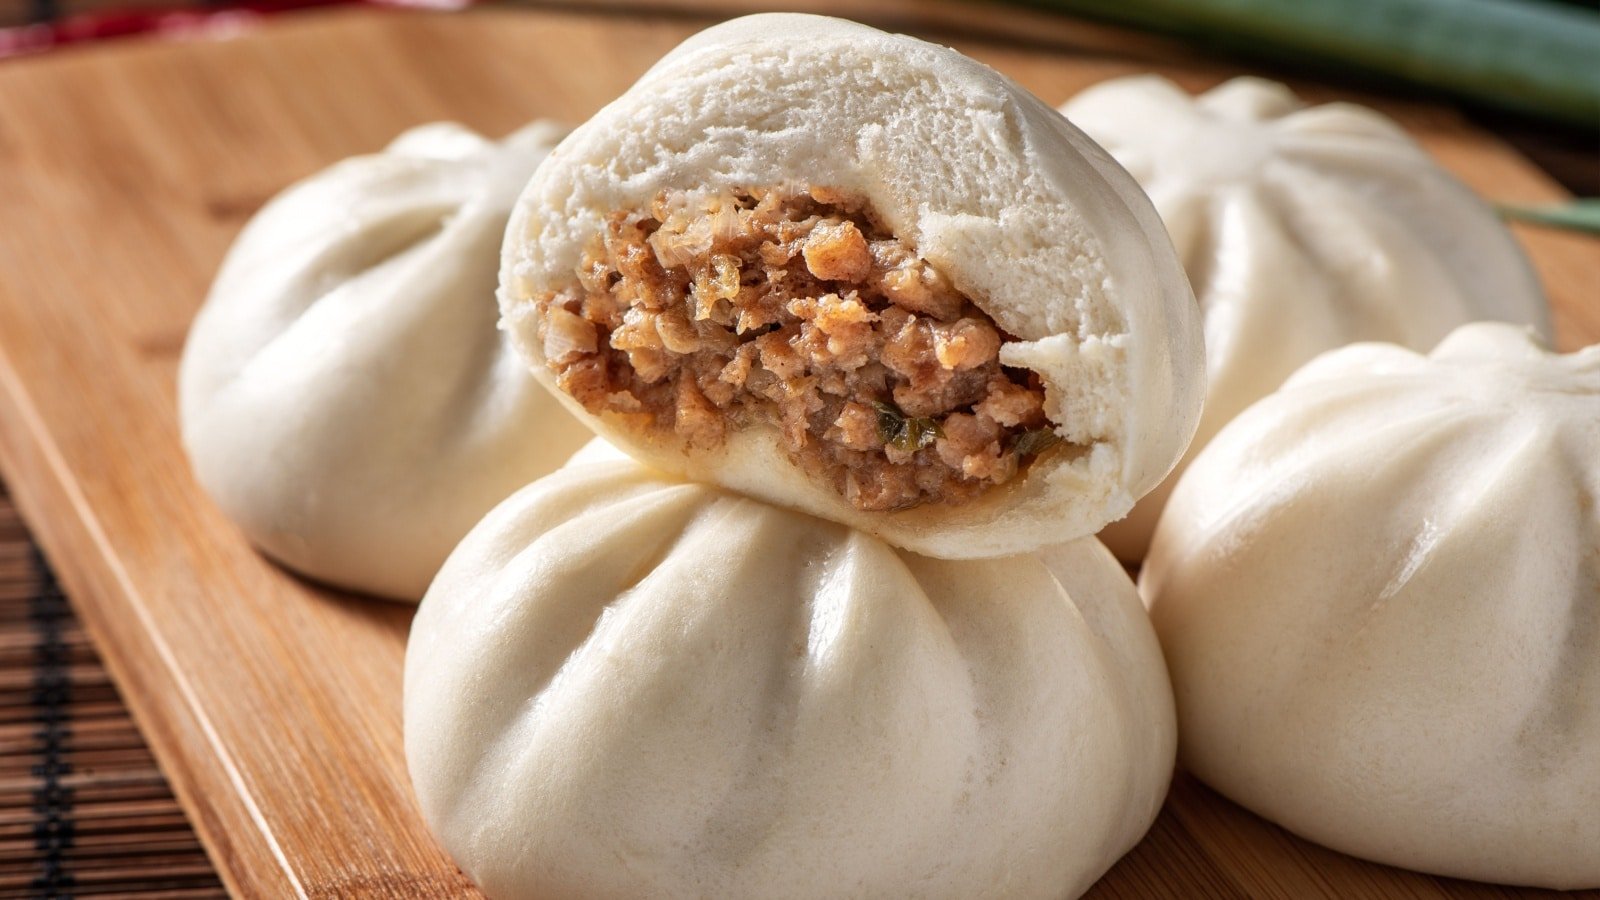 <p><span>Bao buns (also known as baozi) are steamed buns filled with various savory fillings such as pork, chicken, or vegetables. These fluffy and flavorful bites are a popular street food in China and can be found on almost every corner.</span></p><p><span>Bao buns are more than just a quick bite; each soft, warm bun is like a fluffy pillow of heaven, with a surprise inside that leaves you wanting more. The magic lies in the balance of the soft, slightly sweet bun and the savory filling; it’s a harmony of flavors that truly represents the heart and soul of Chinese street food culture. When you get a chance to try a bao bun, don’t just take a bite; take a moment to appreciate the tradition and craft that goes into each bun.</span></p>